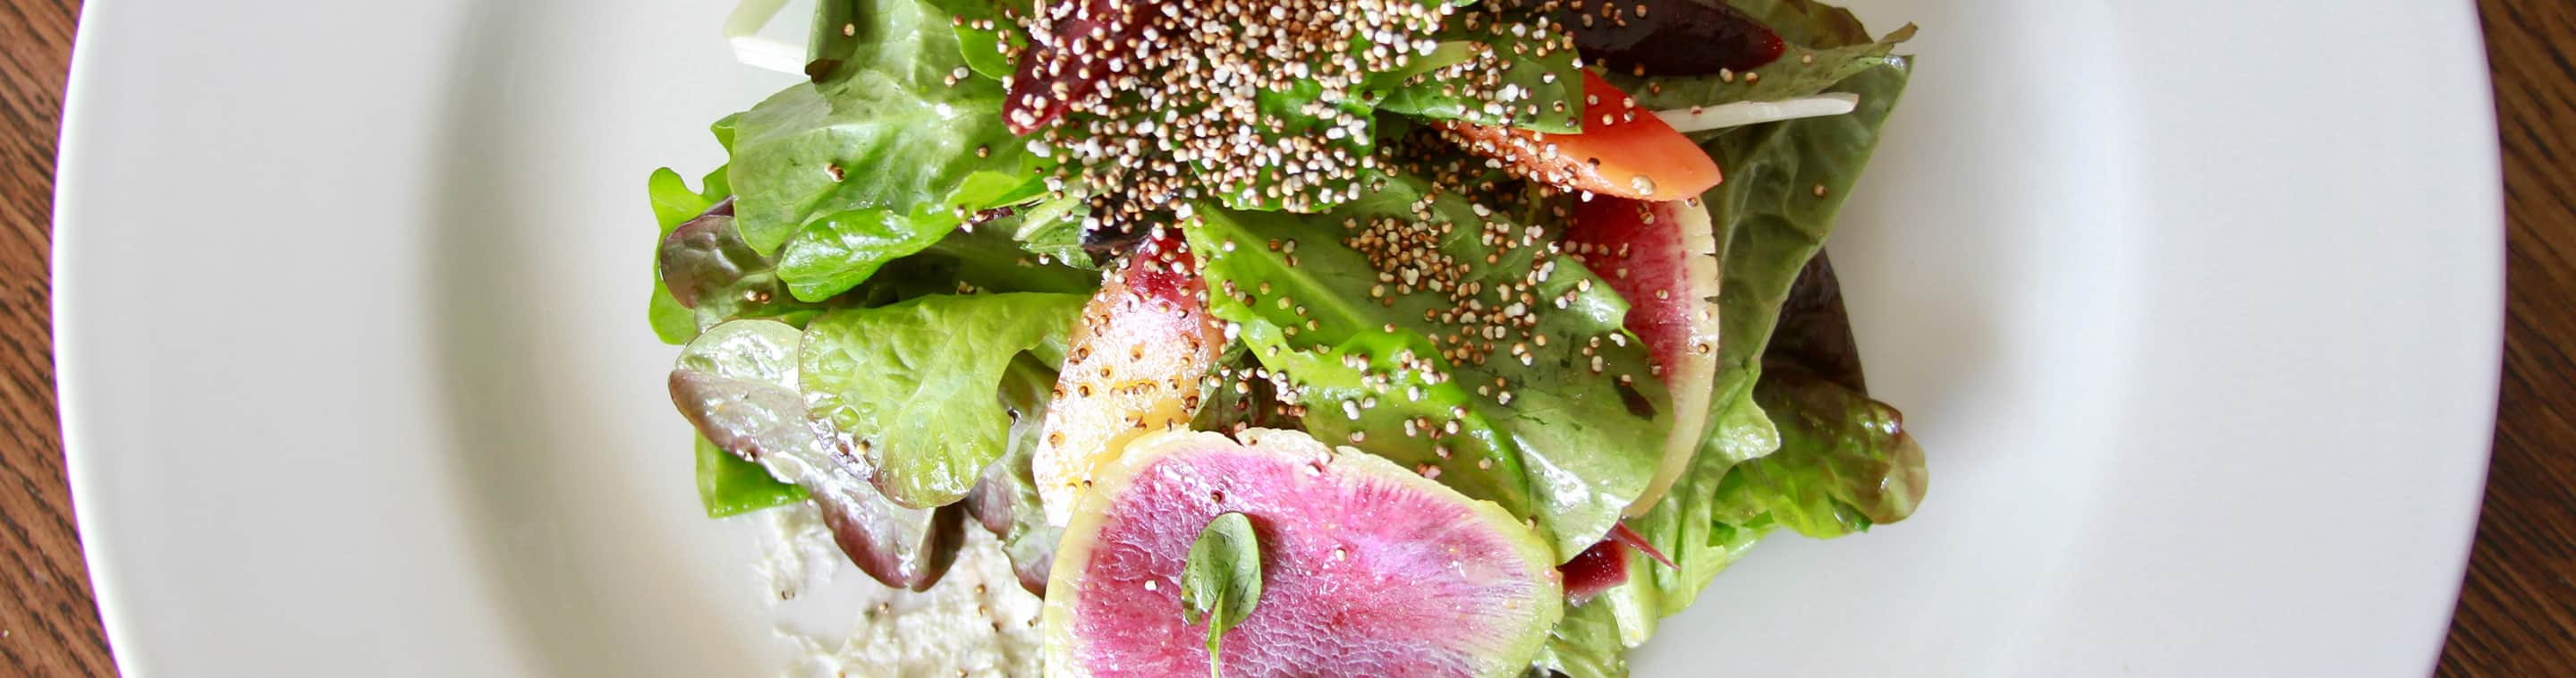 Seasonal garden greens salad with rainbow radishes and toasted quinoa at The Bistro in Jackson, Wyoming.